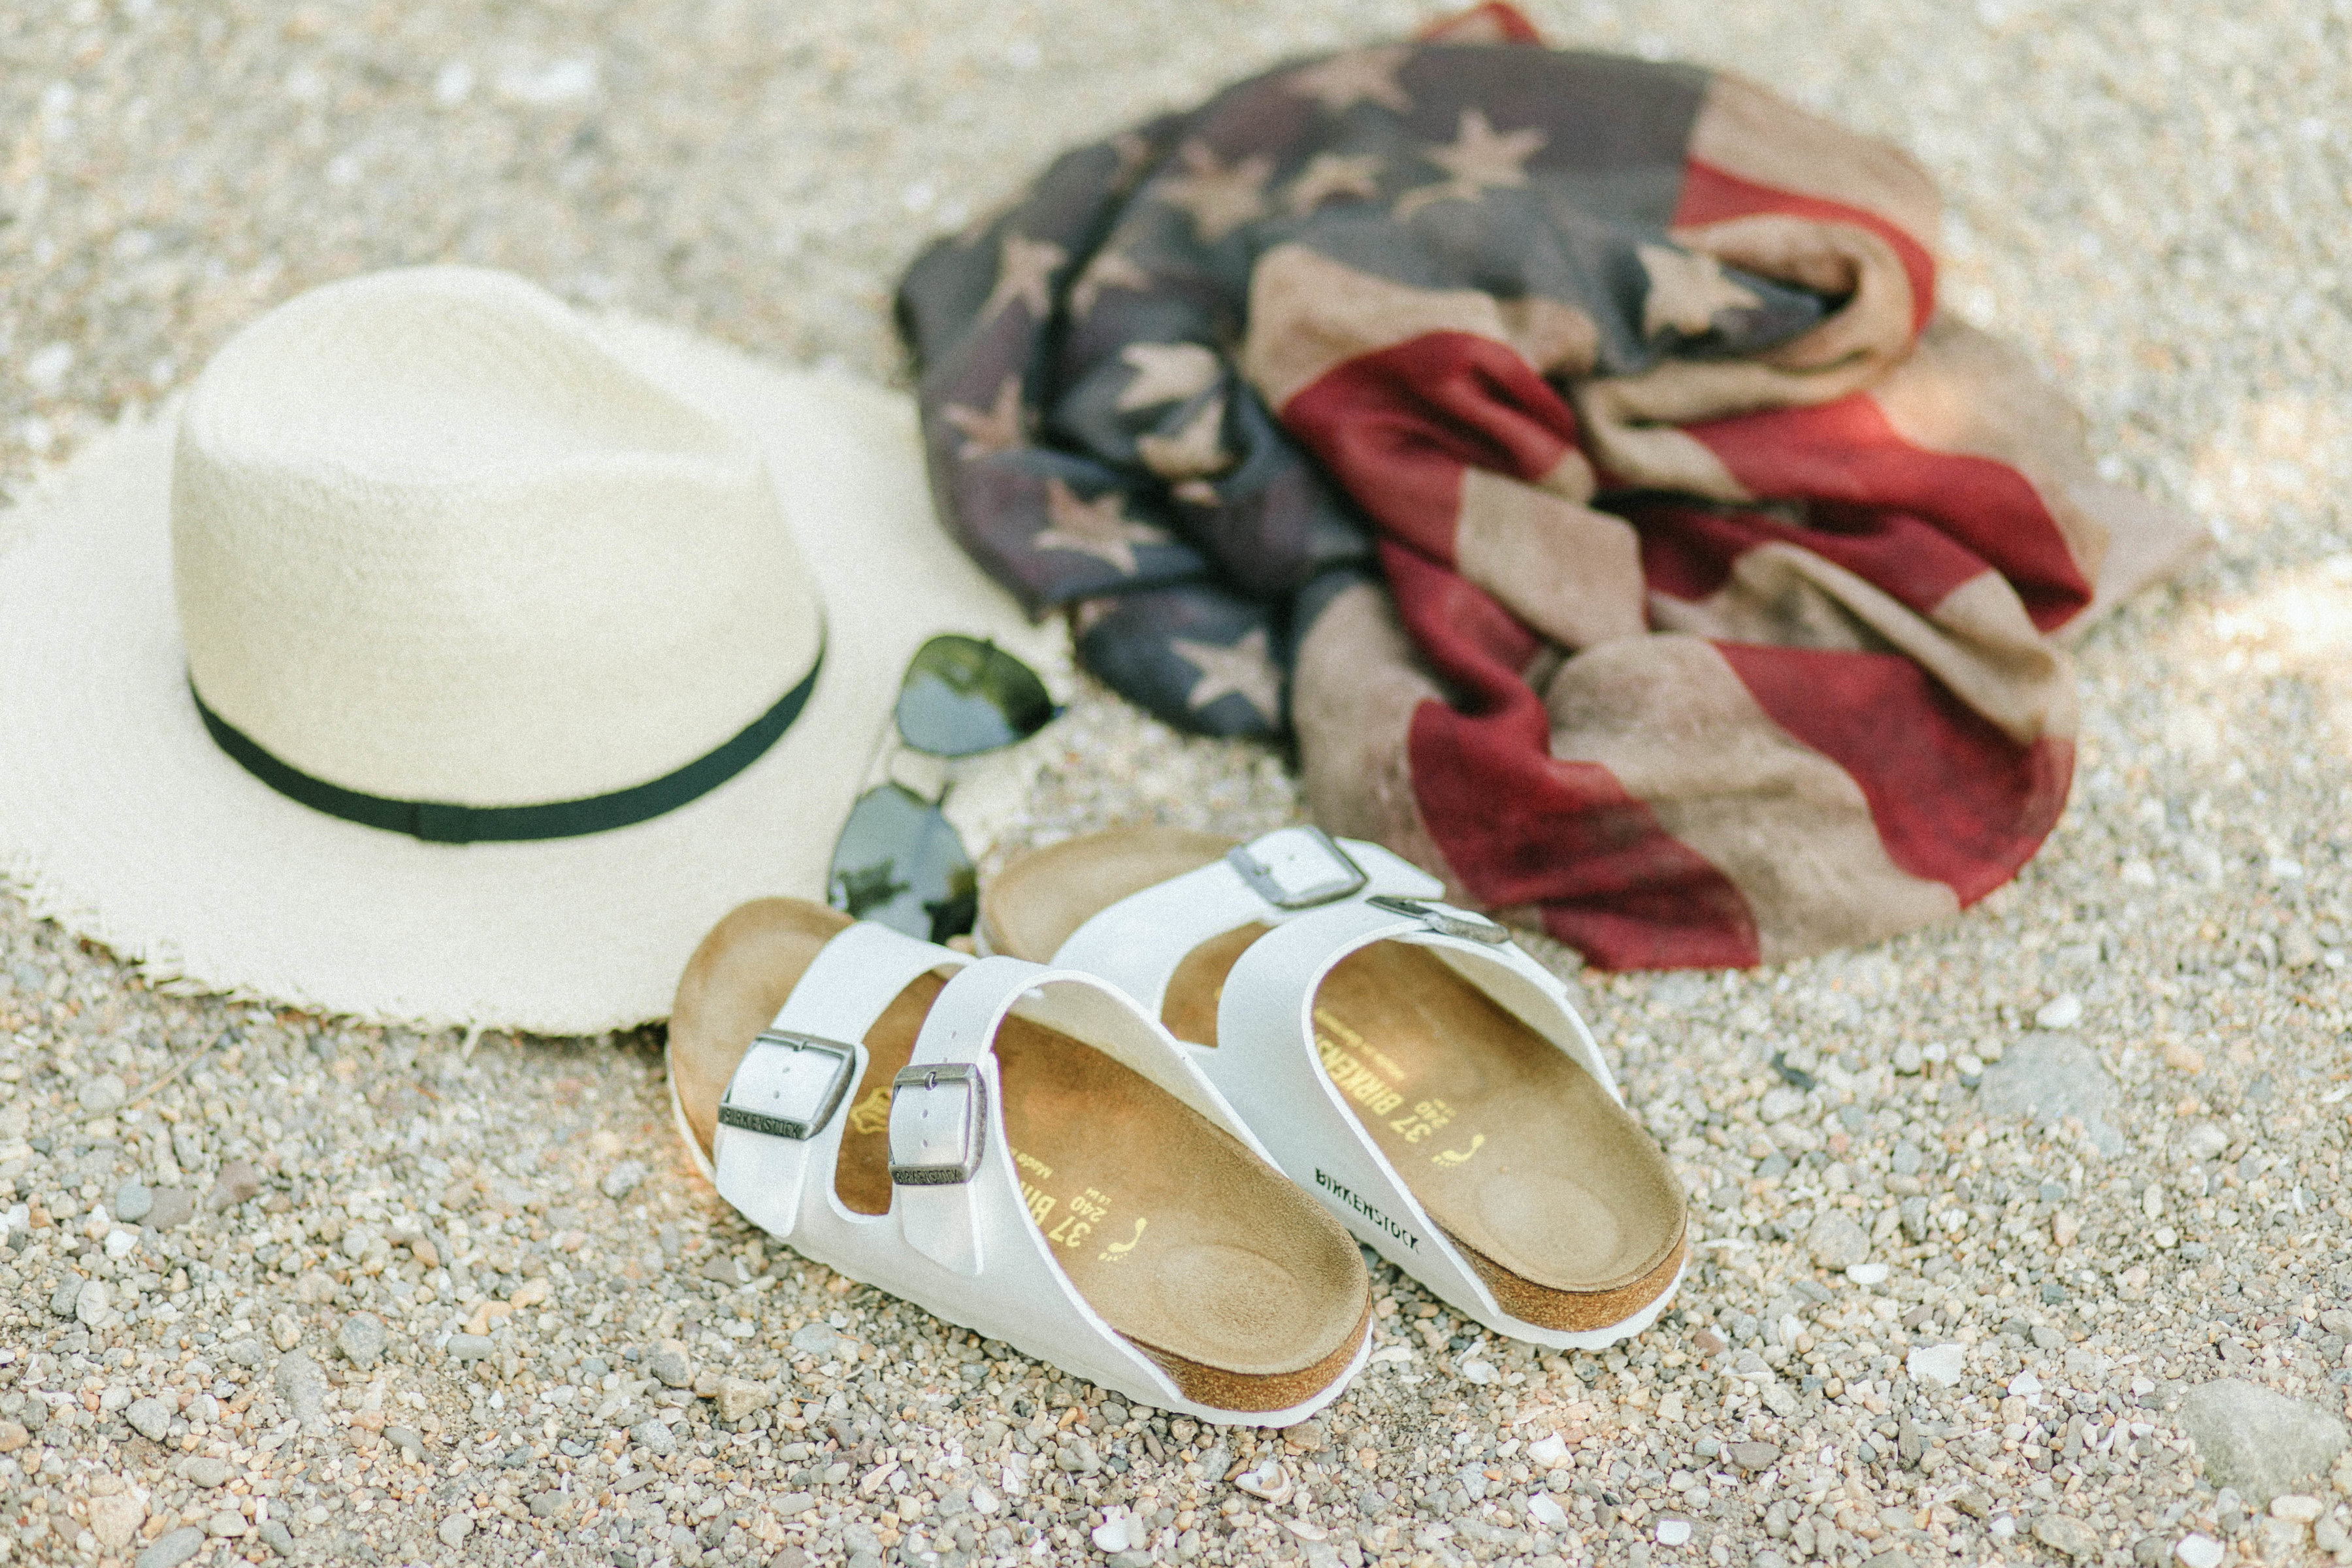 Check out these tips on How to Style Birkenstocks for Summer, along with outfit inspiration and tips before purchasing! These sandals are back in style, and better than ever!